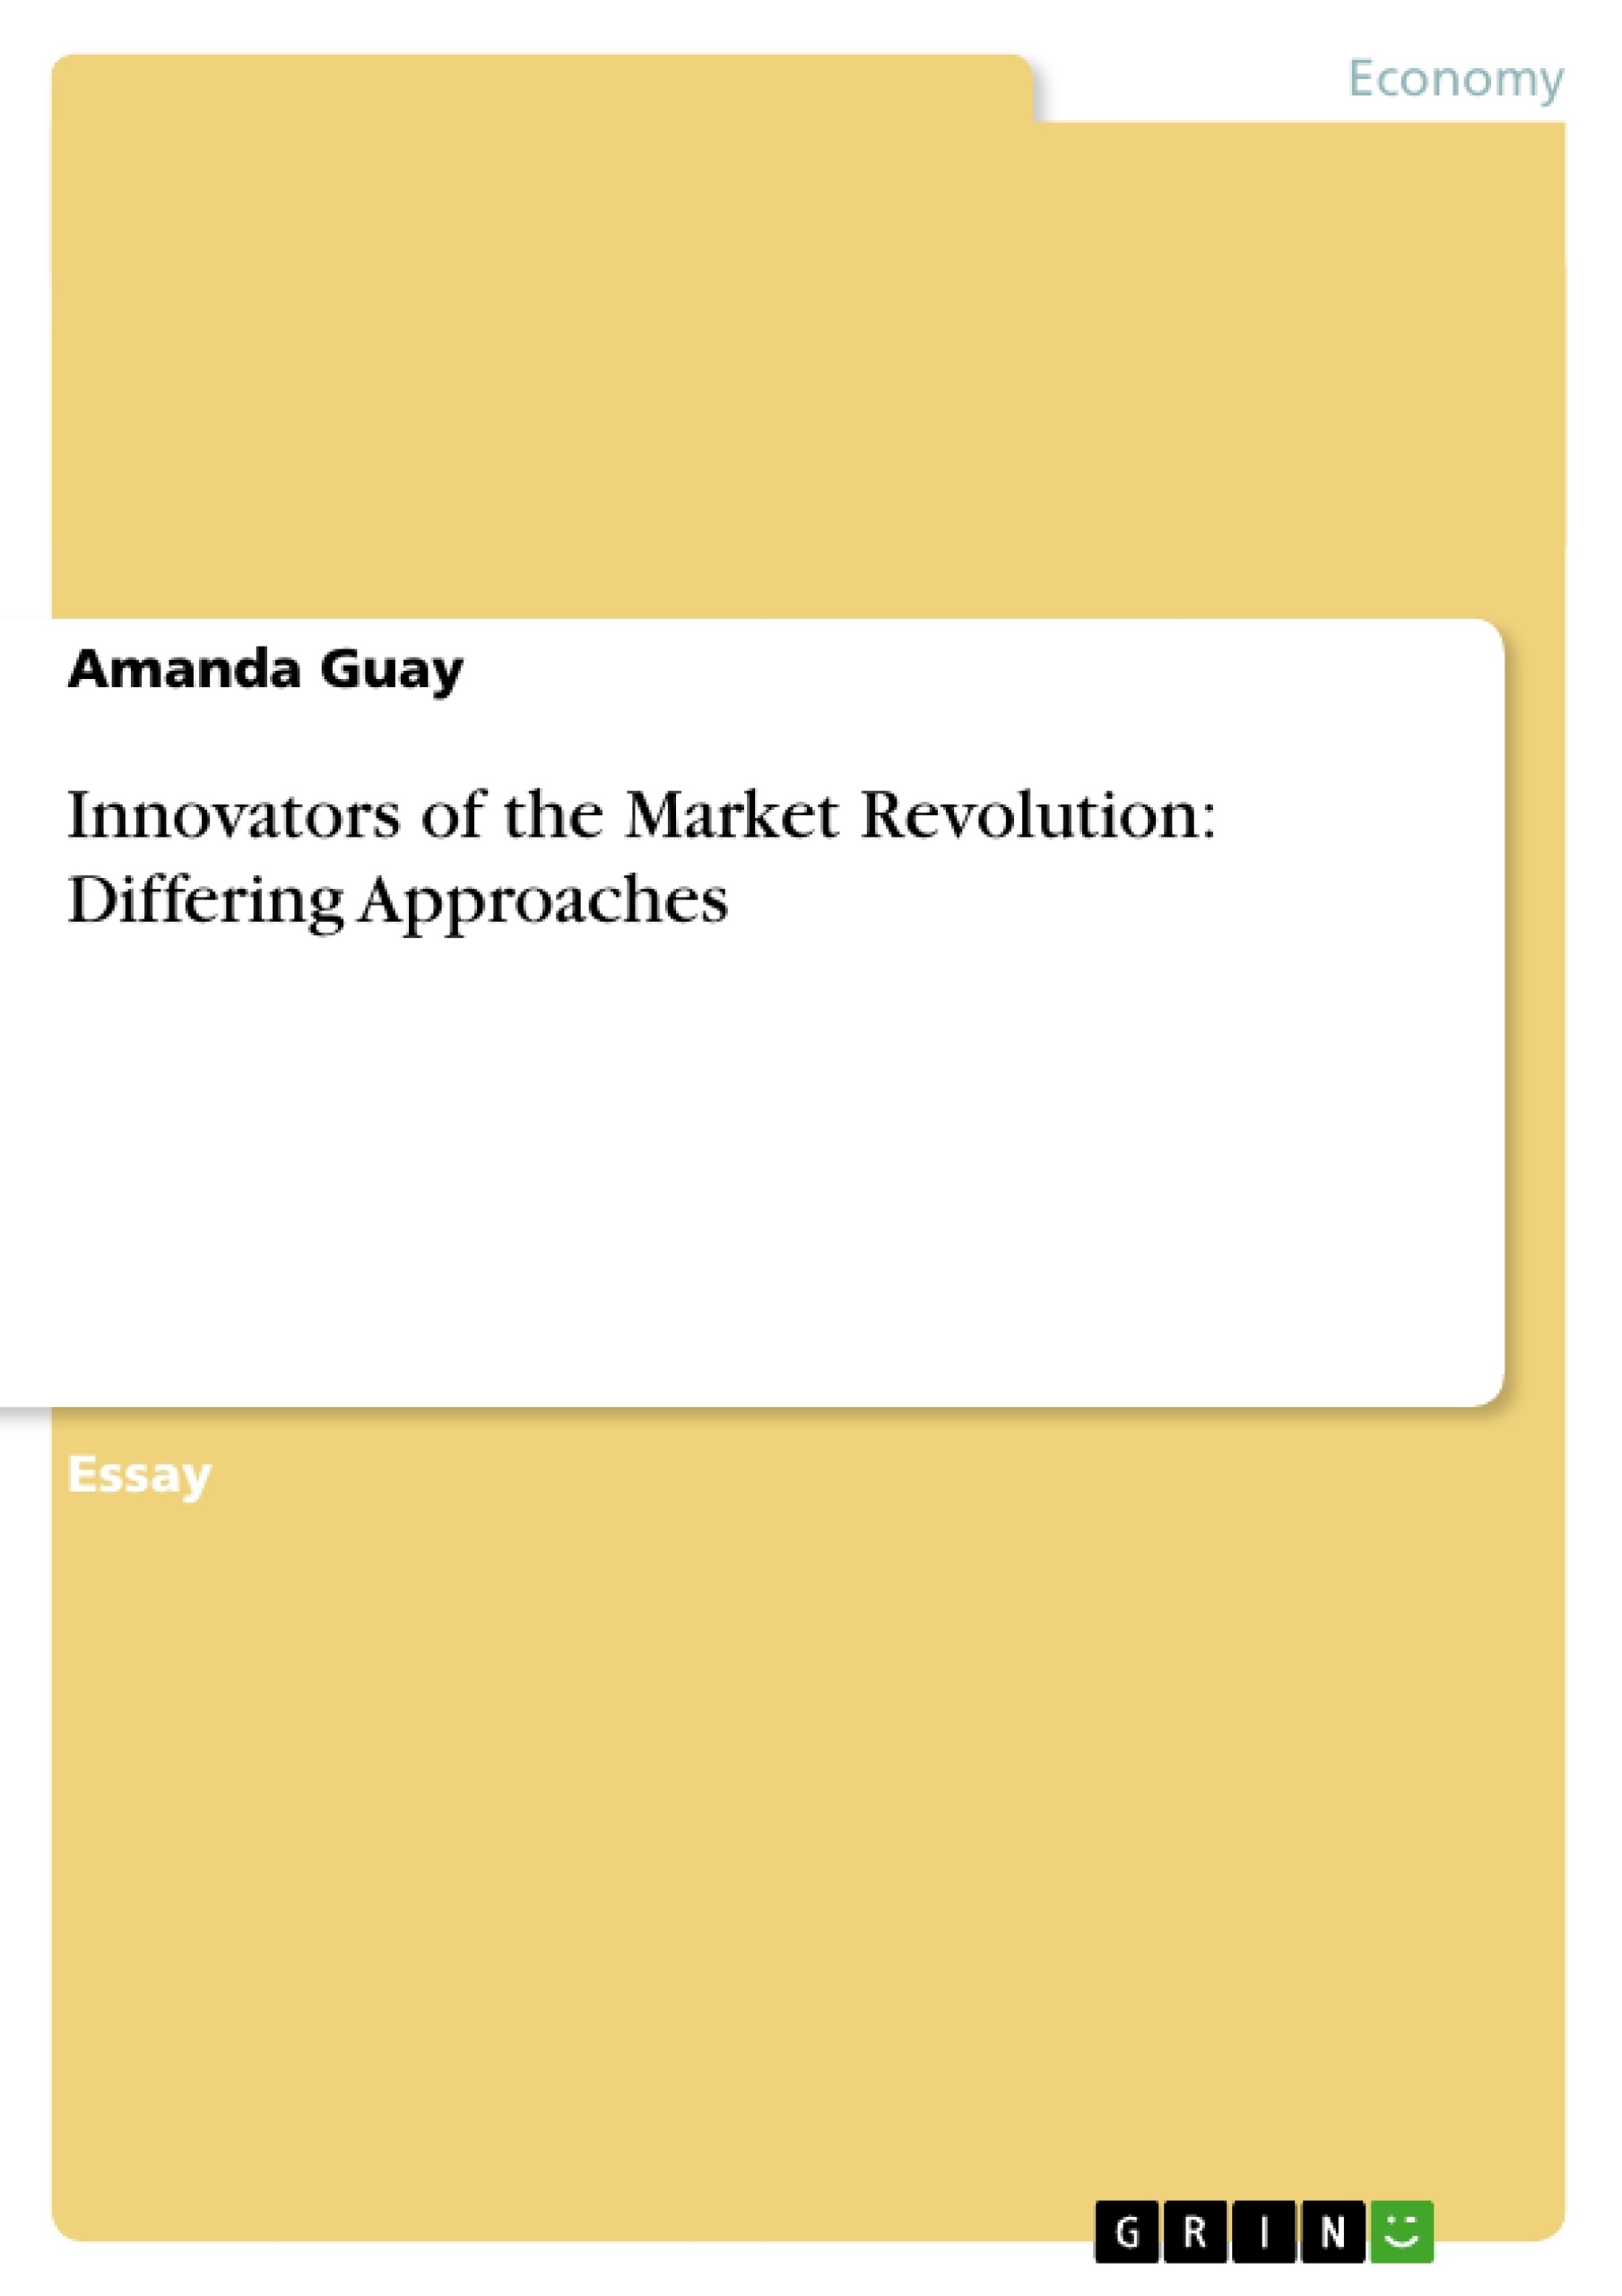 Title: Innovators of the Market Revolution: Differing Approaches